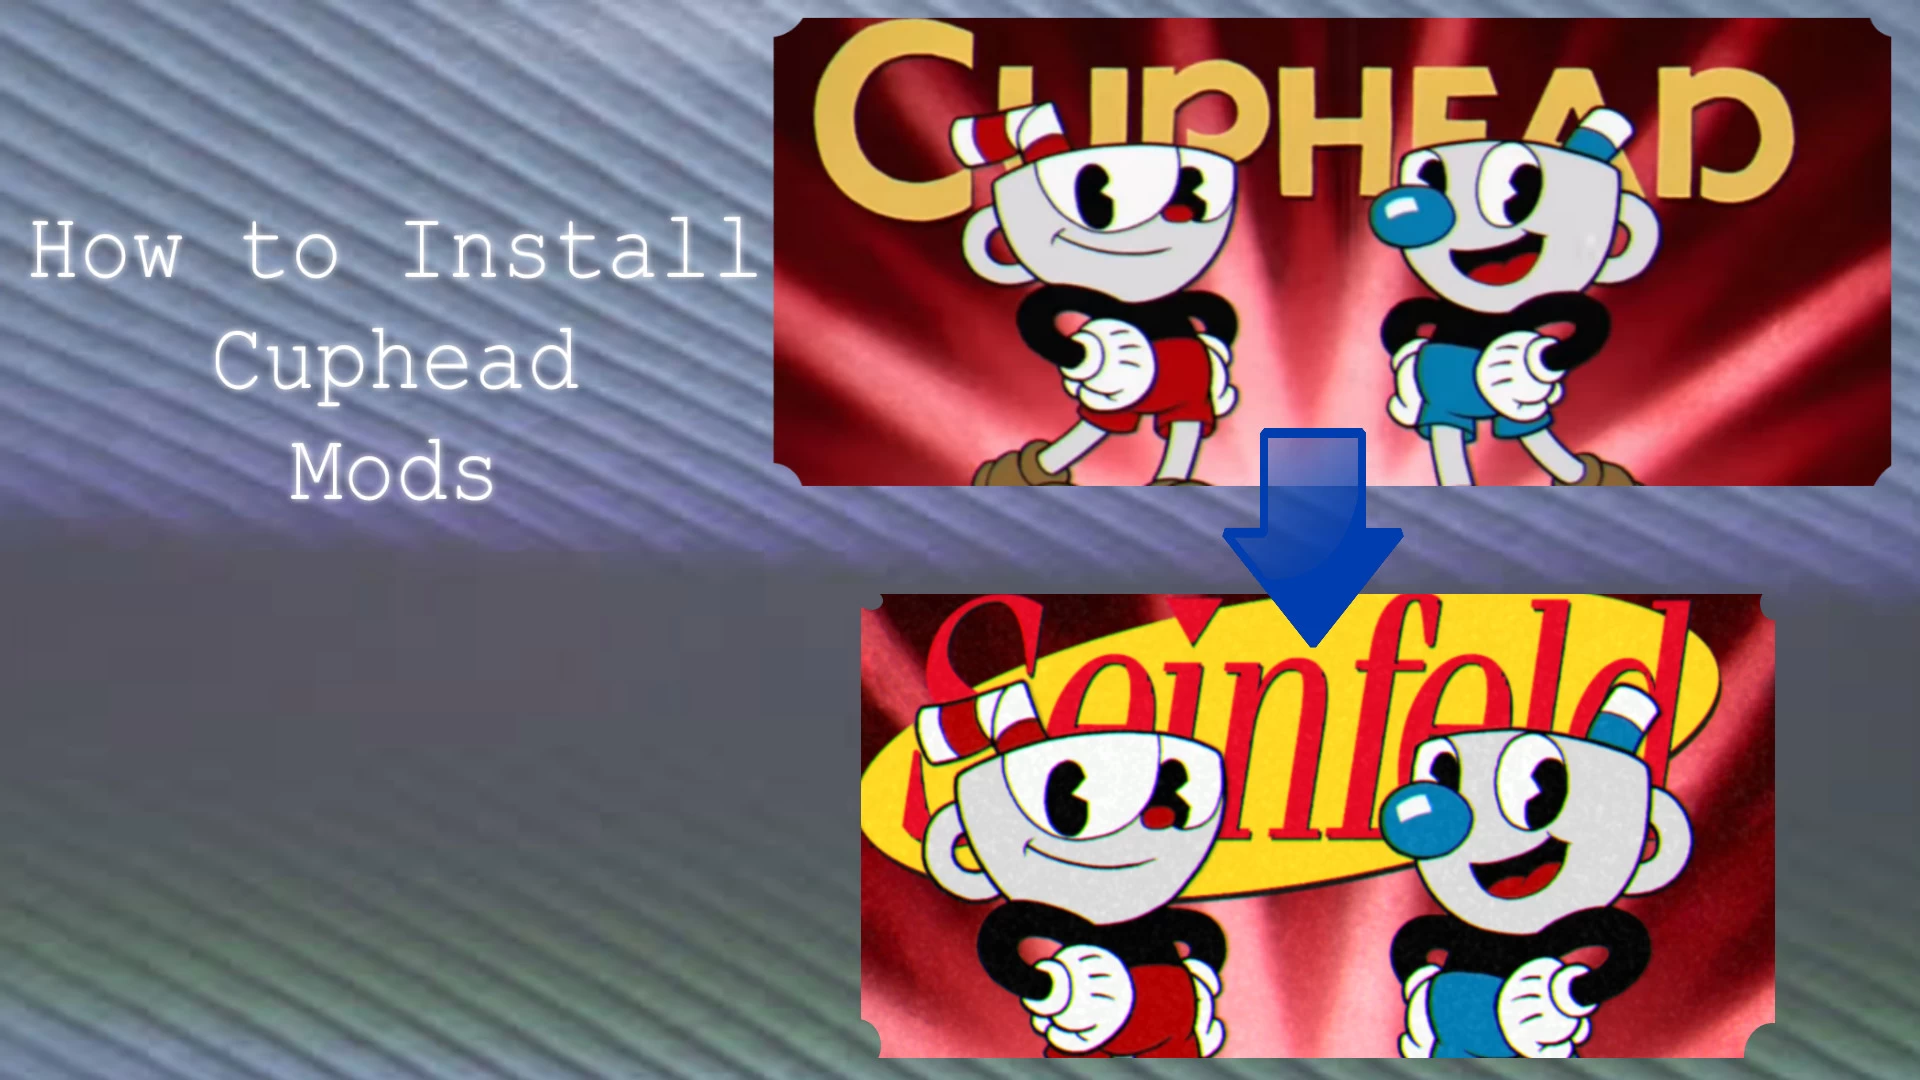 How To Install Cuphead Mods Cuphead Tutorials